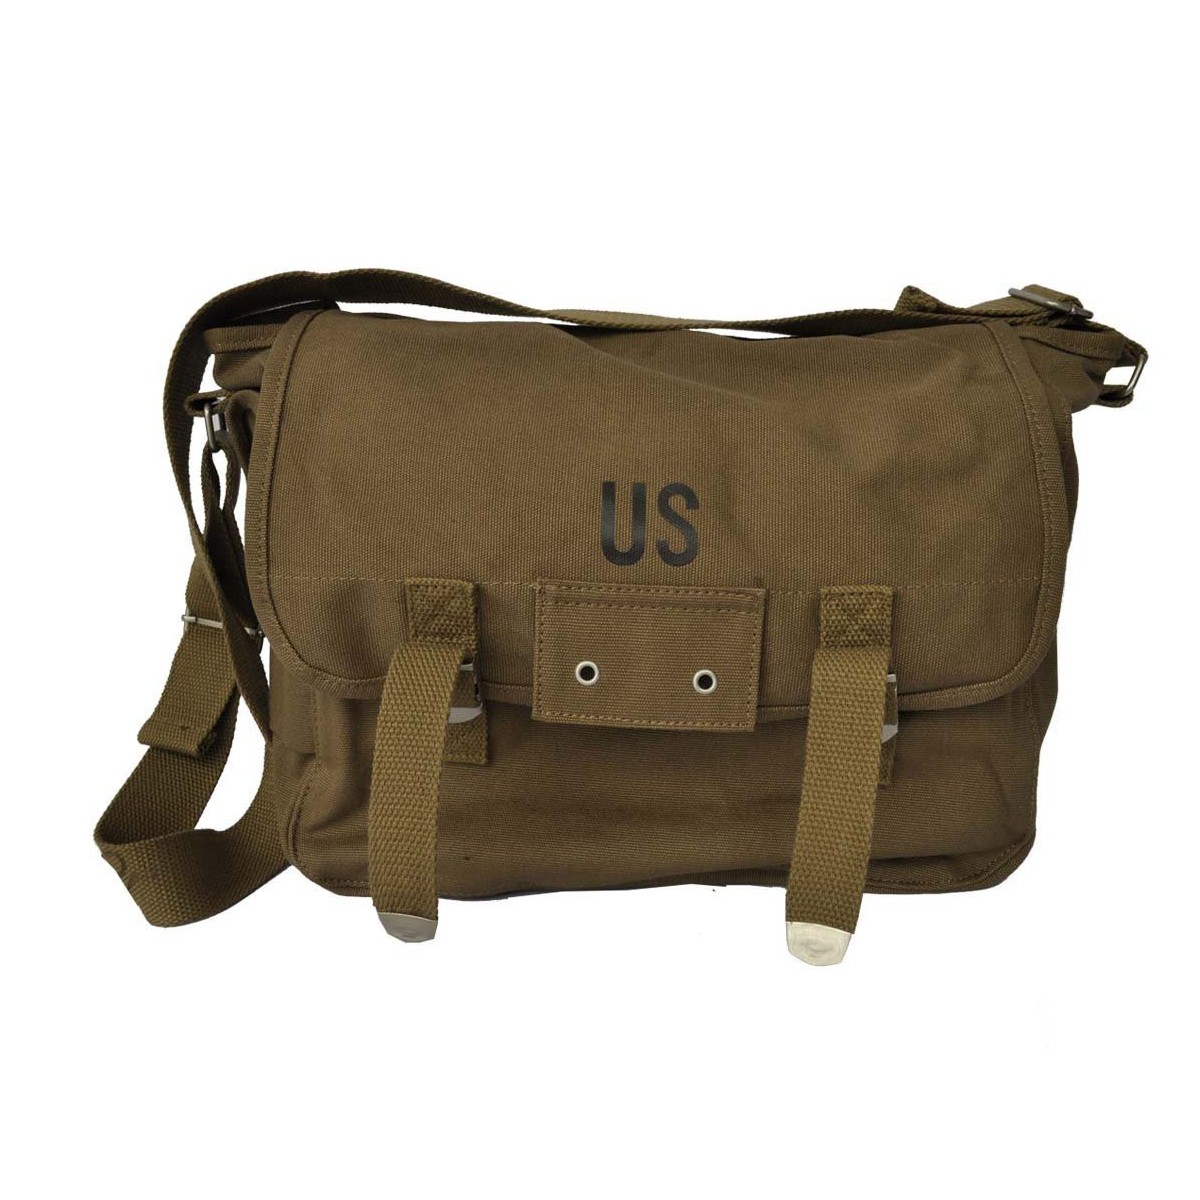 Besace US Army - Cometeshop